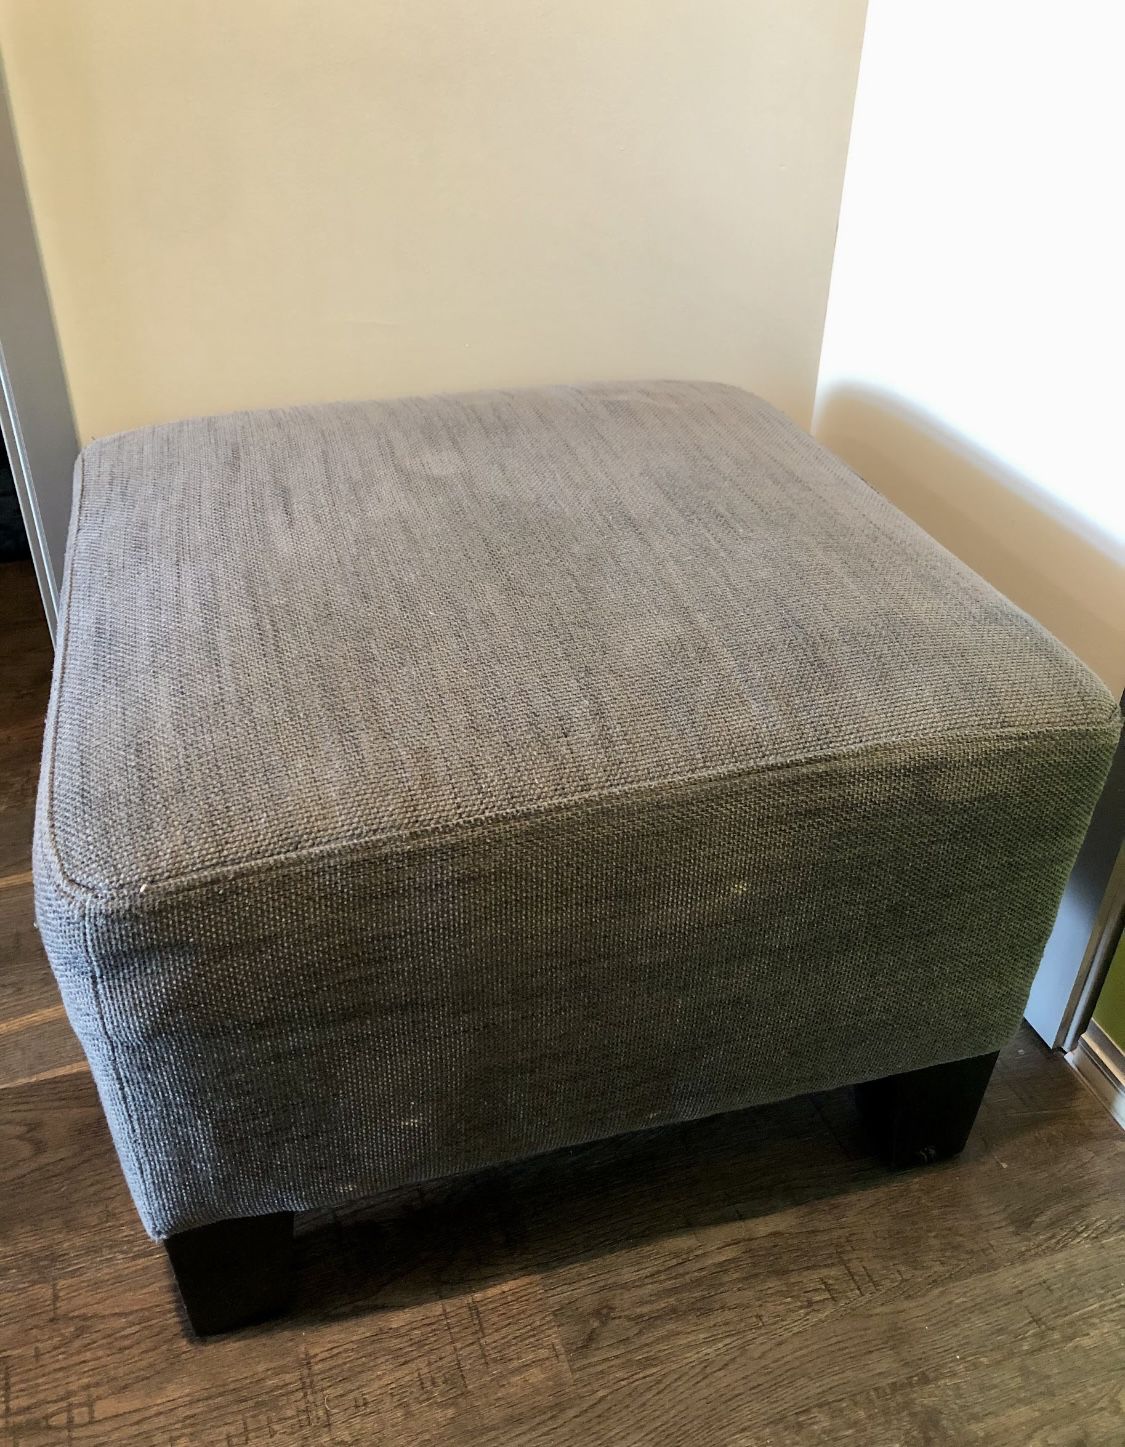 Ottoman/Footstool For Sale